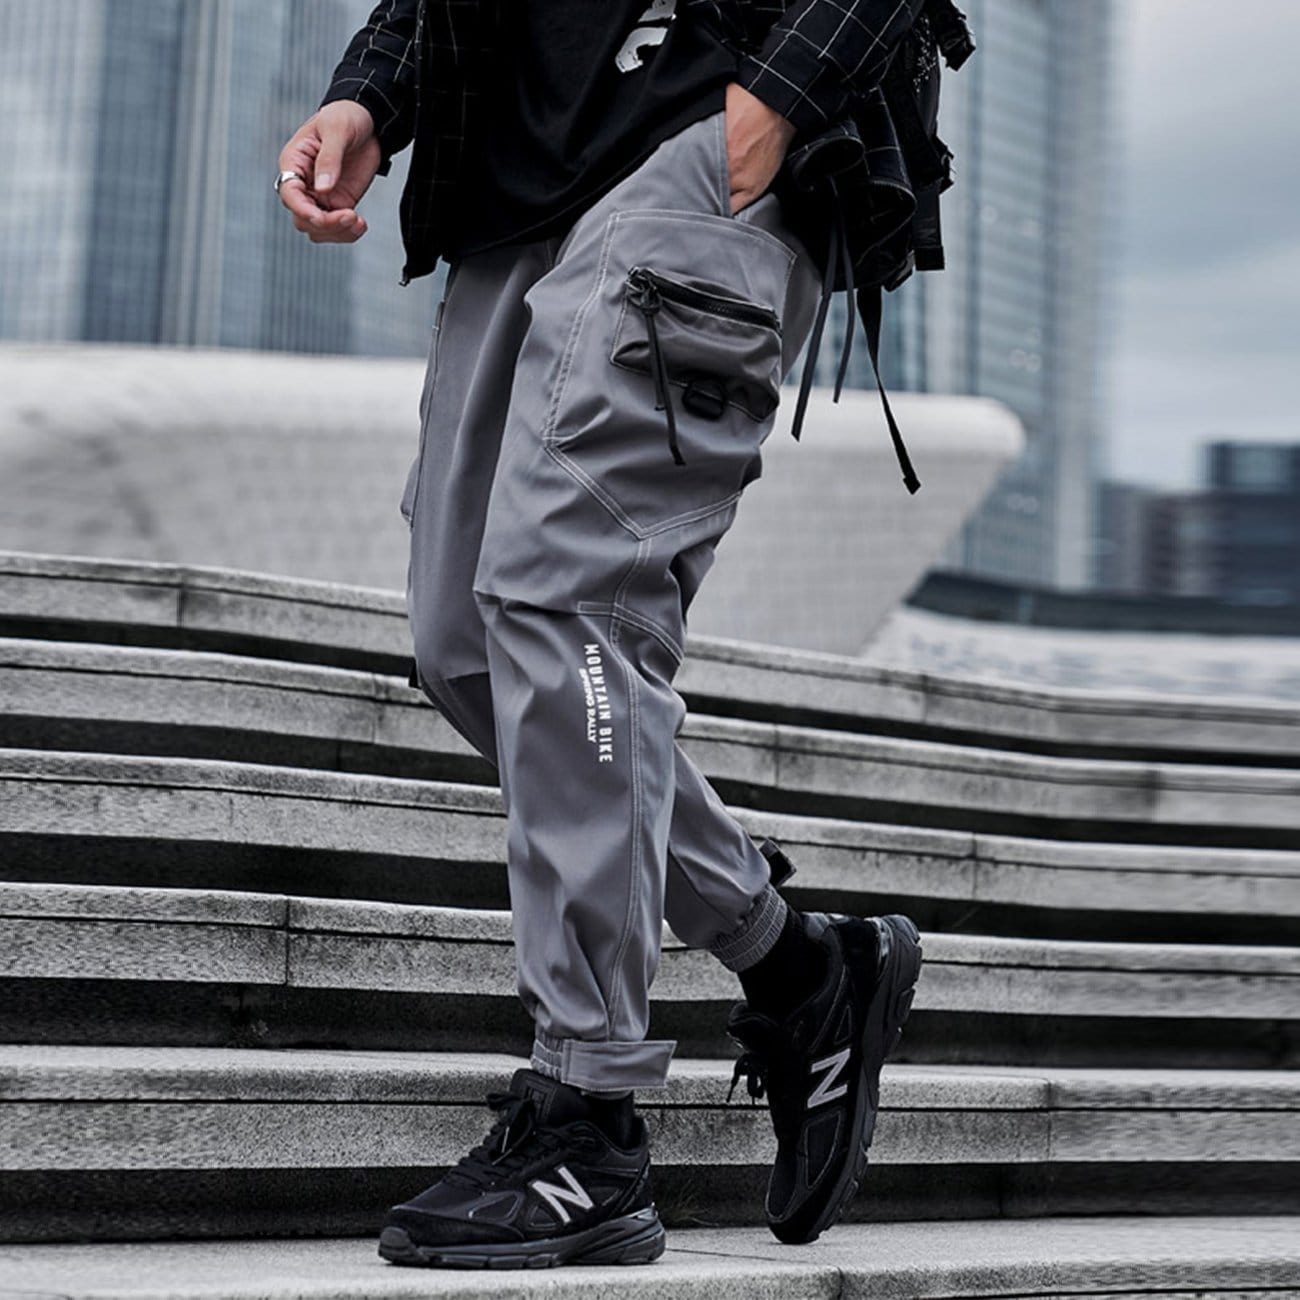 TO Function Bright Line Zipper Pockets Velcro Cargo Pants